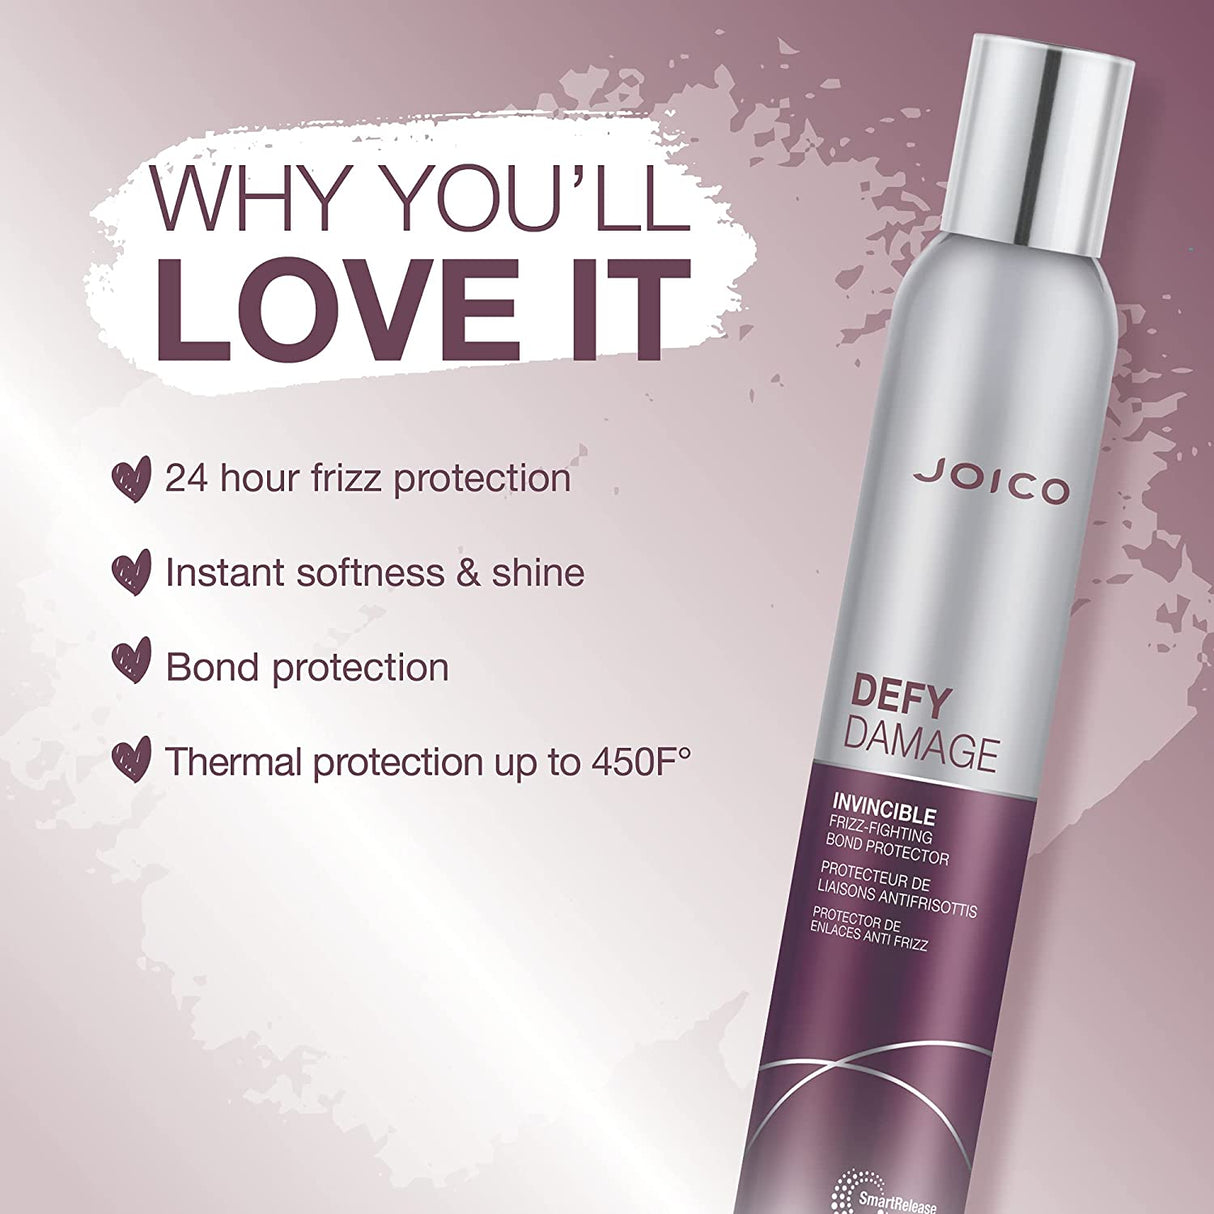 Defy Damage Invincible Frizz Fighting Bond Protector-Joico